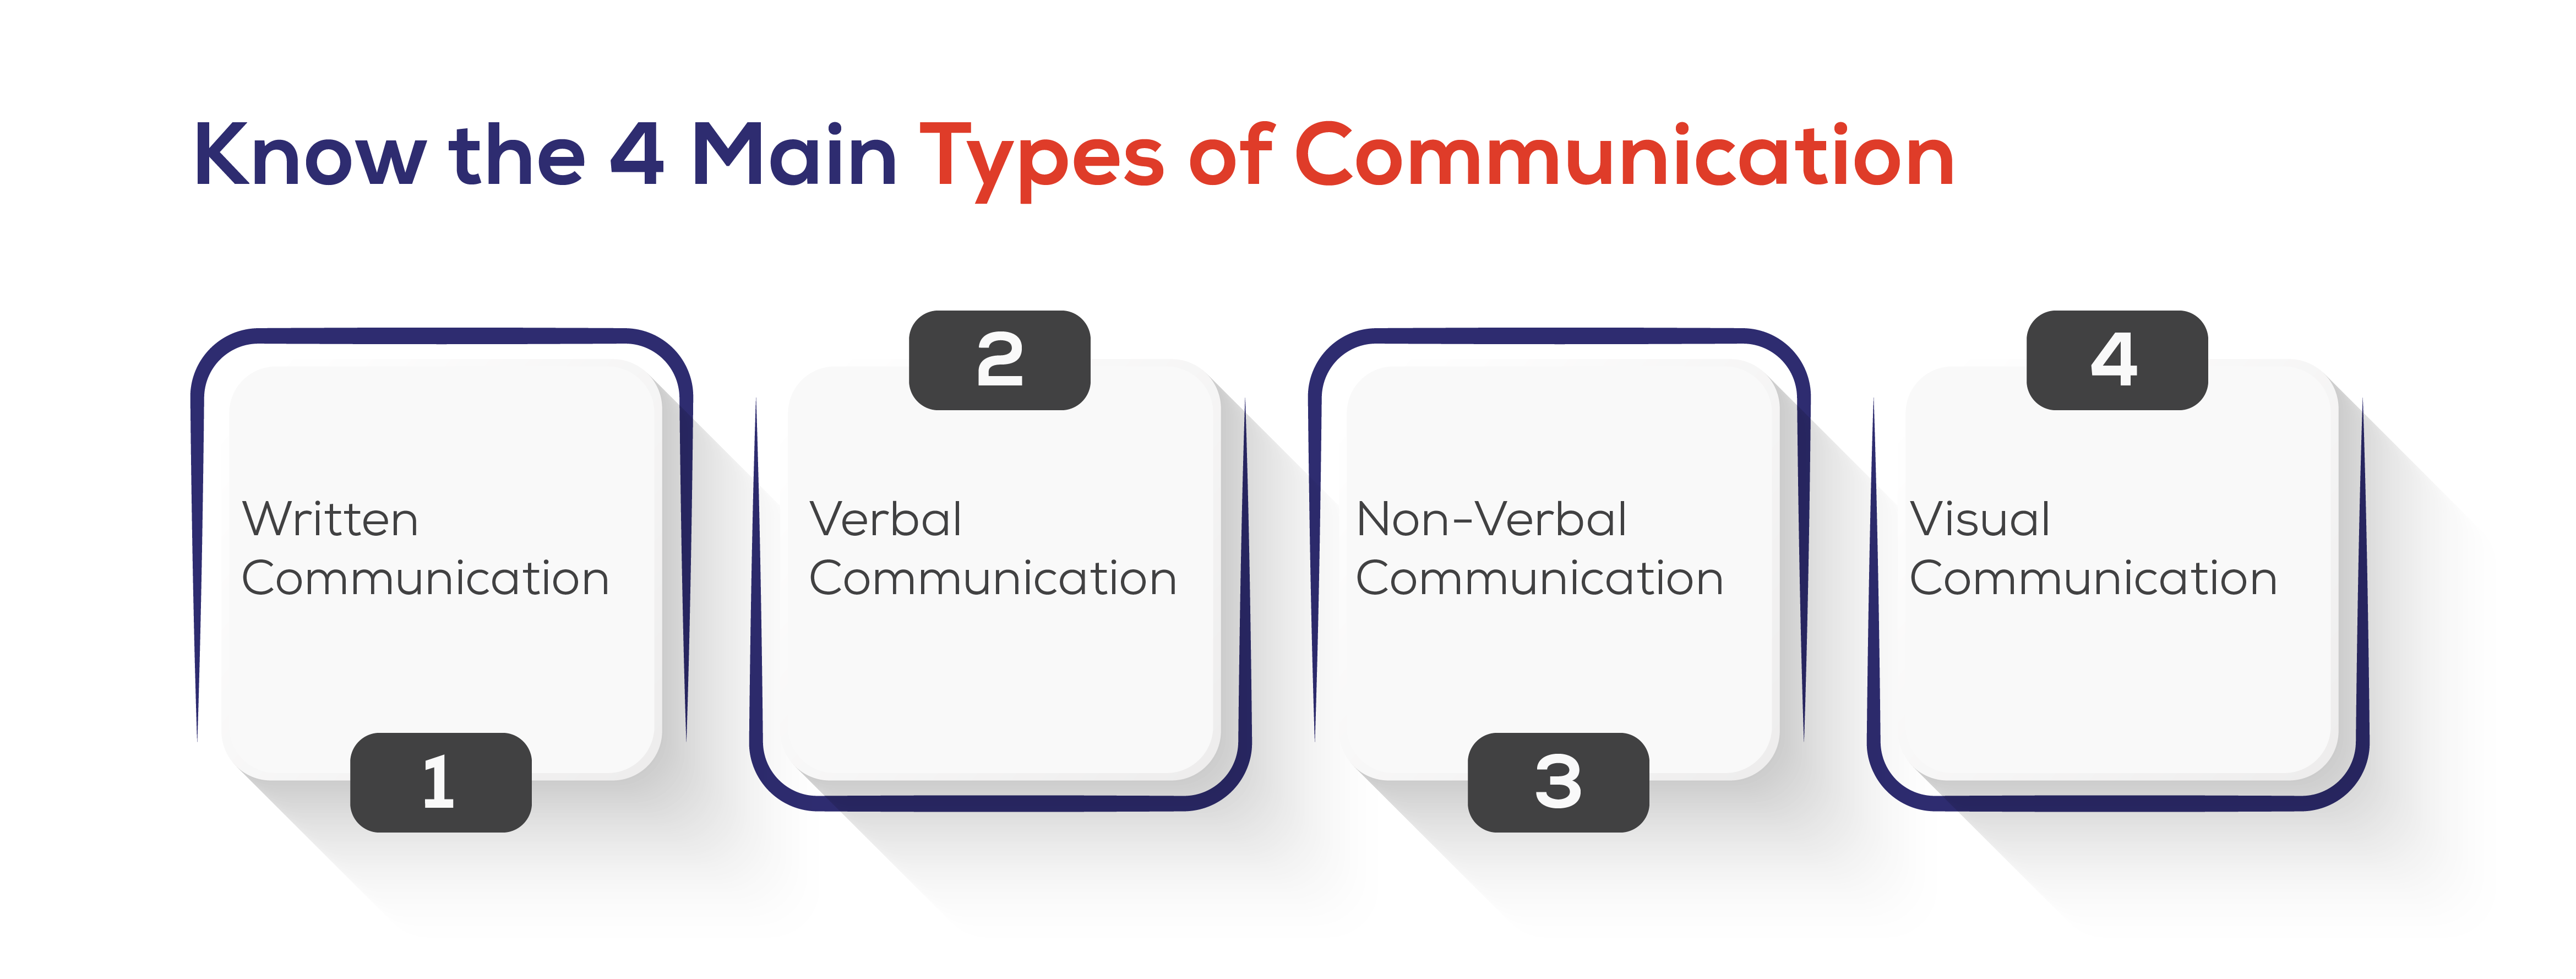 Know the 4 Main Types of Communication 